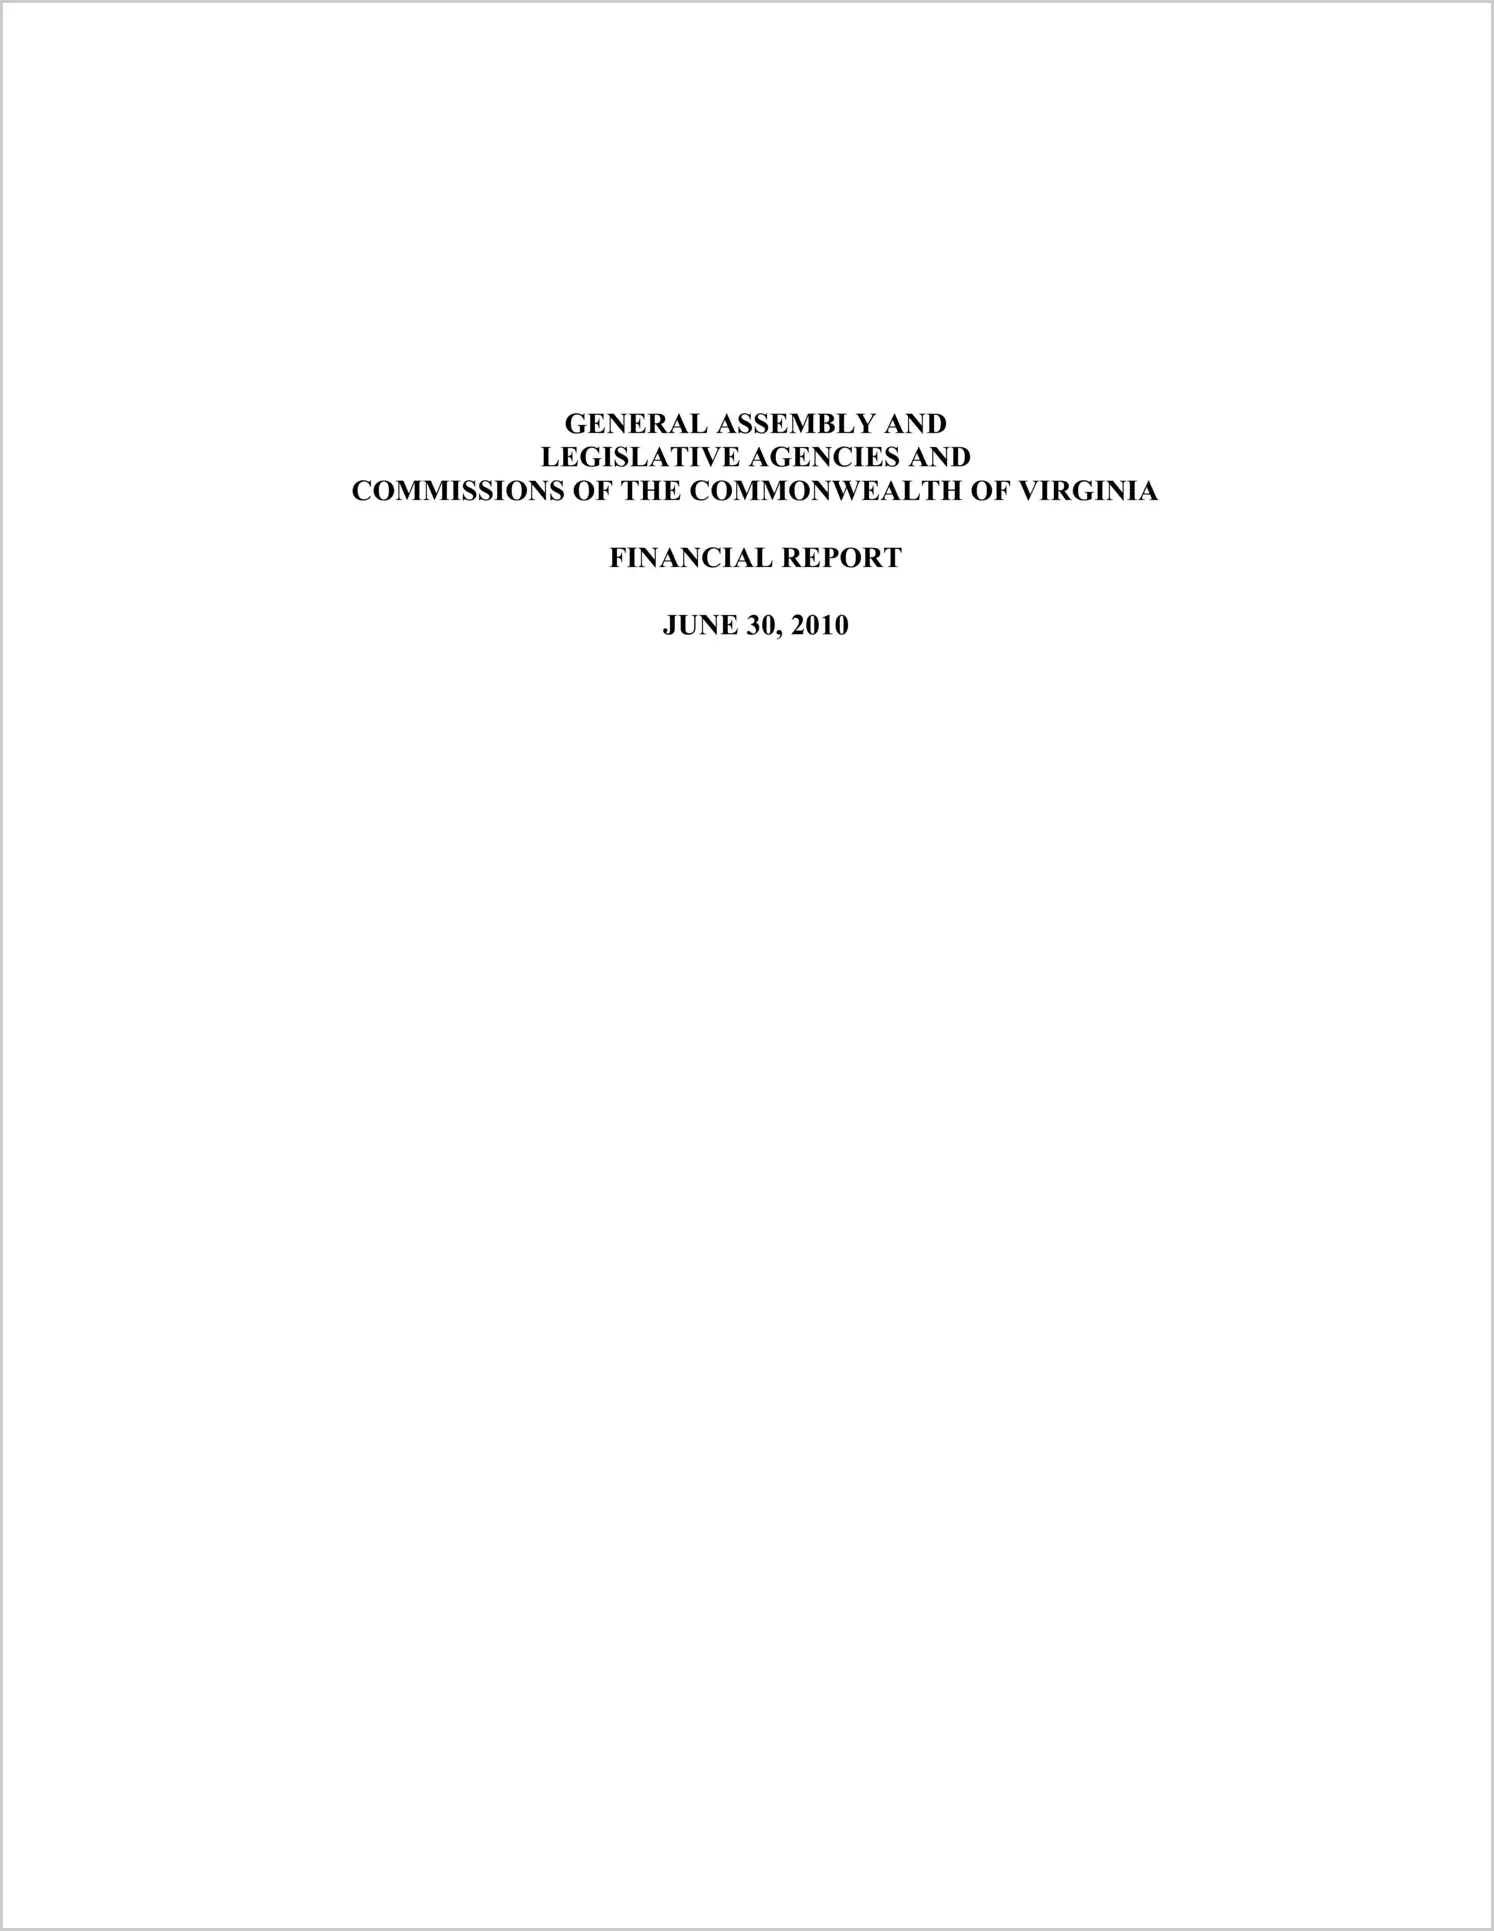 General Assembly and Legislative Agencies and Commissions of the Commonwealth of Virginia Financial Report For The Fiscal Year ended June 30, 2010